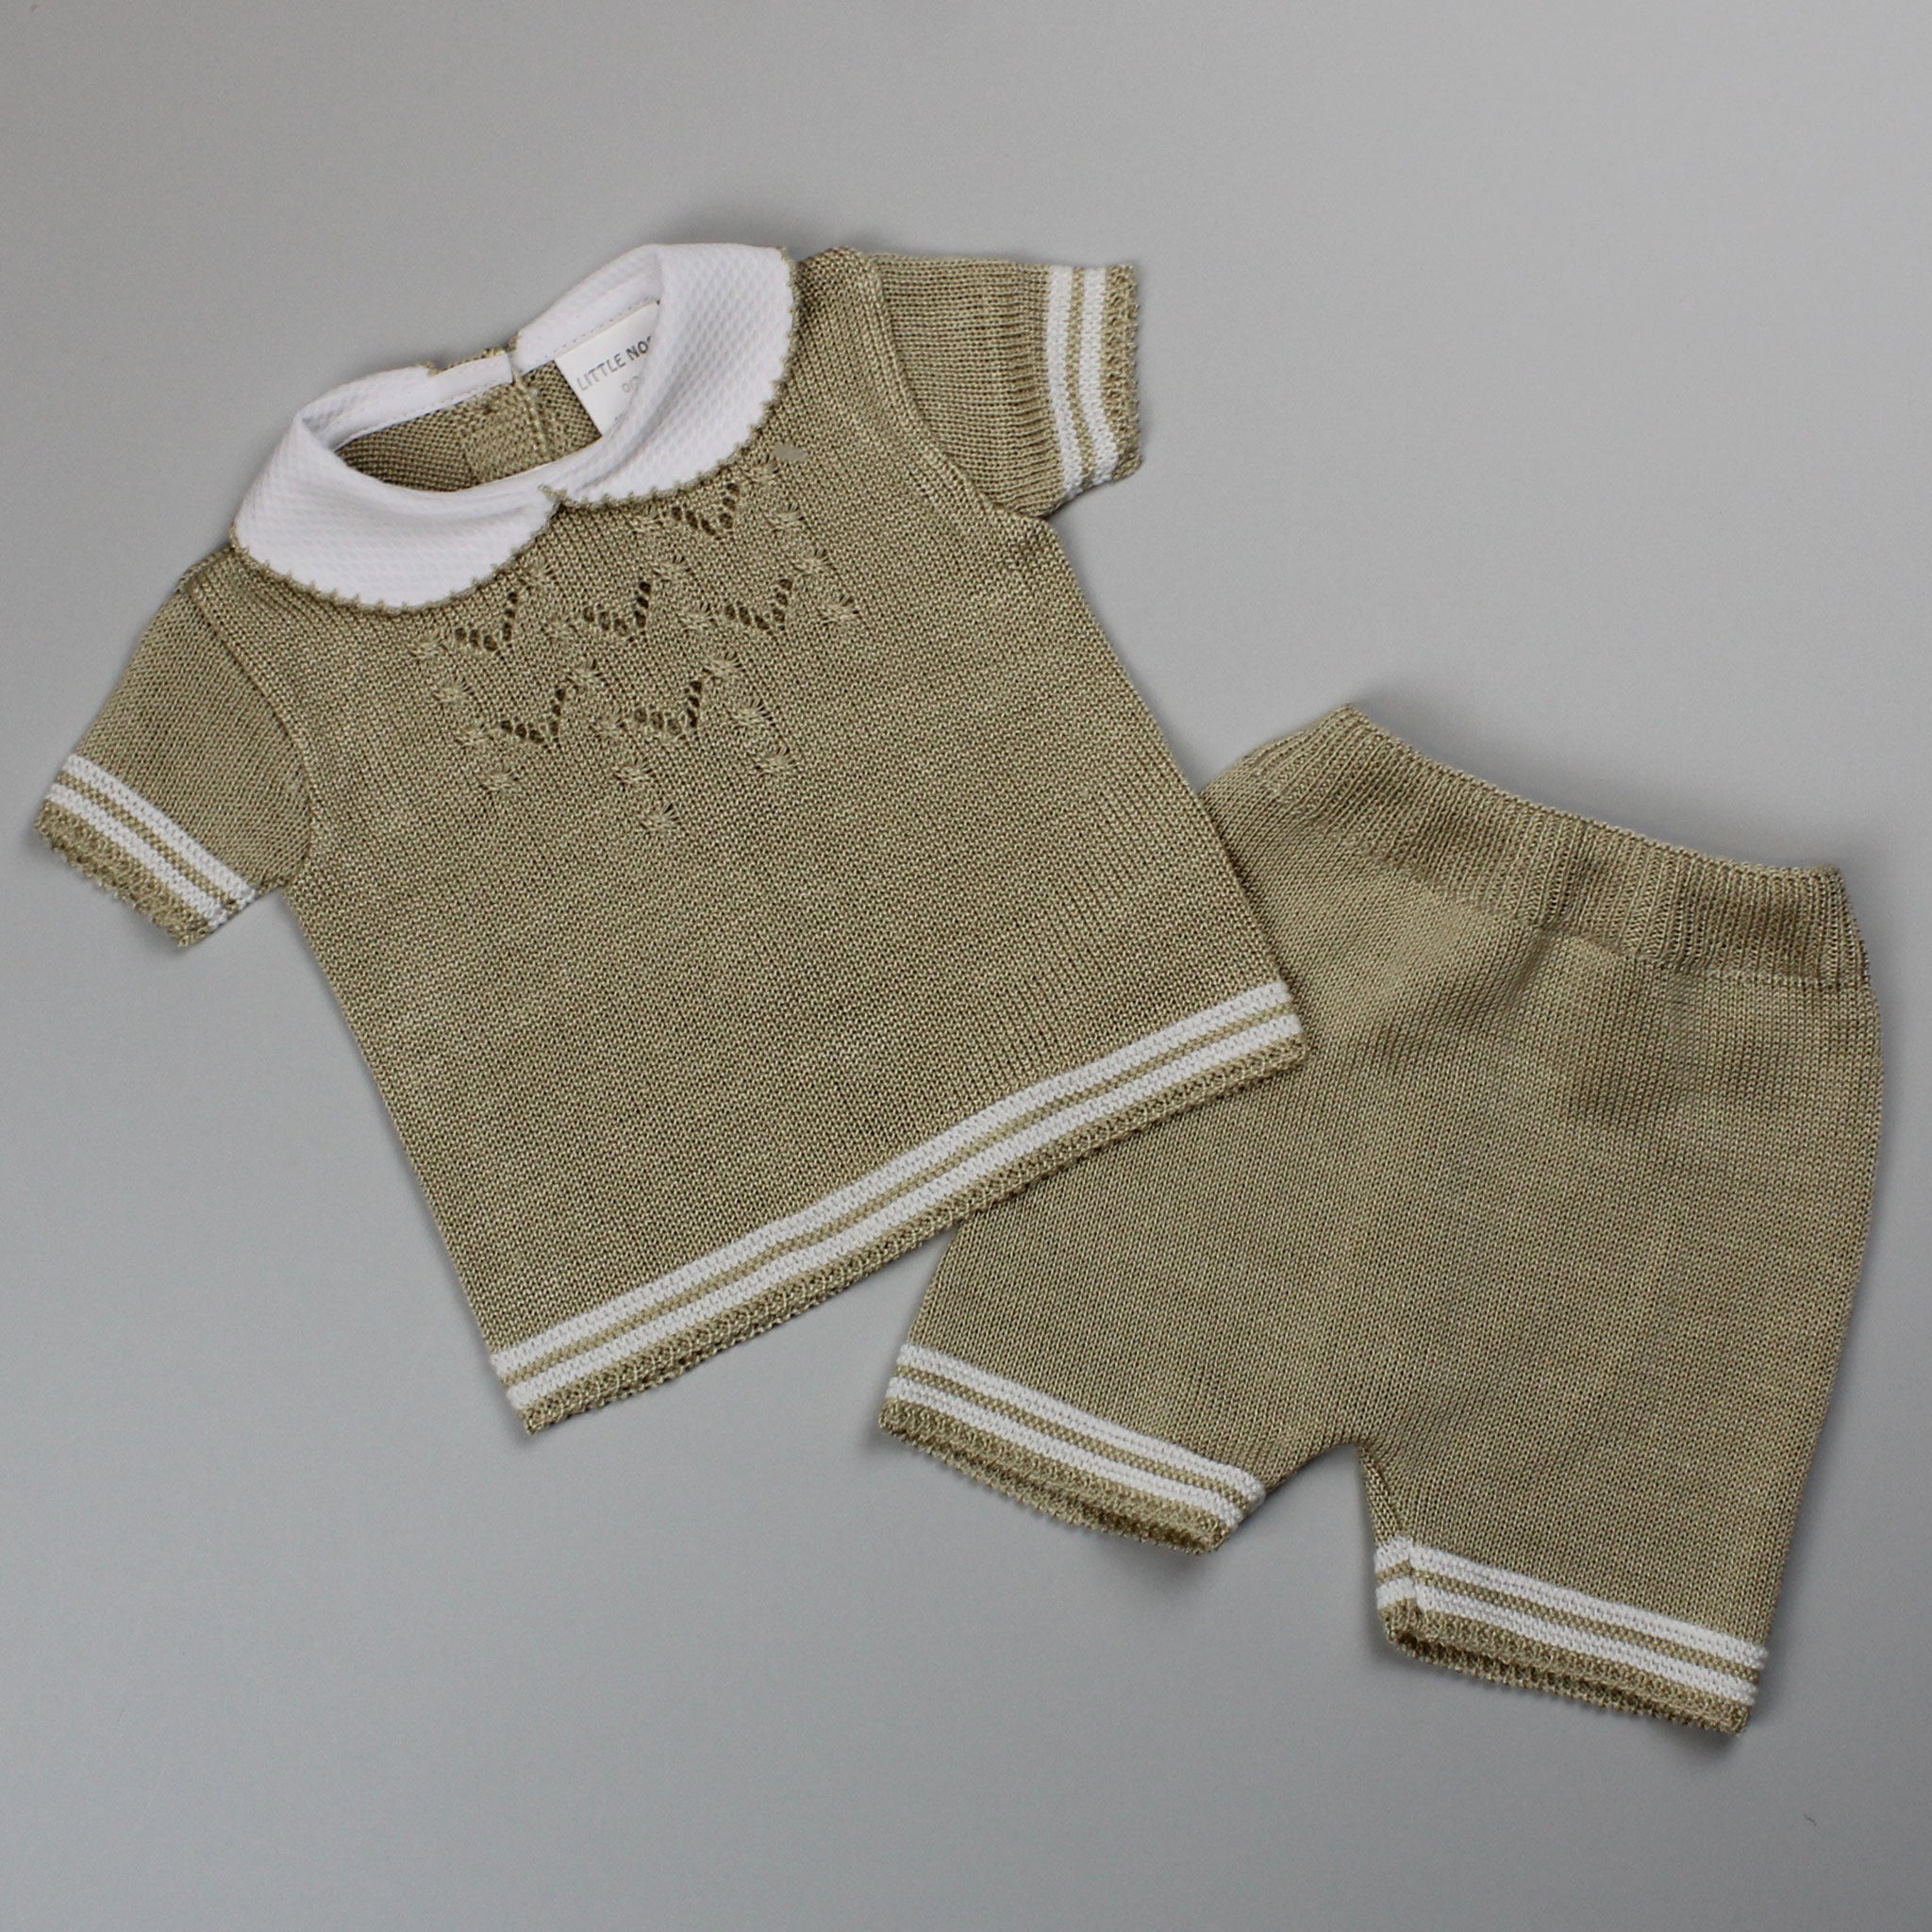 Baby Girls Knitted Shirt & Shorts Outfit - Beige